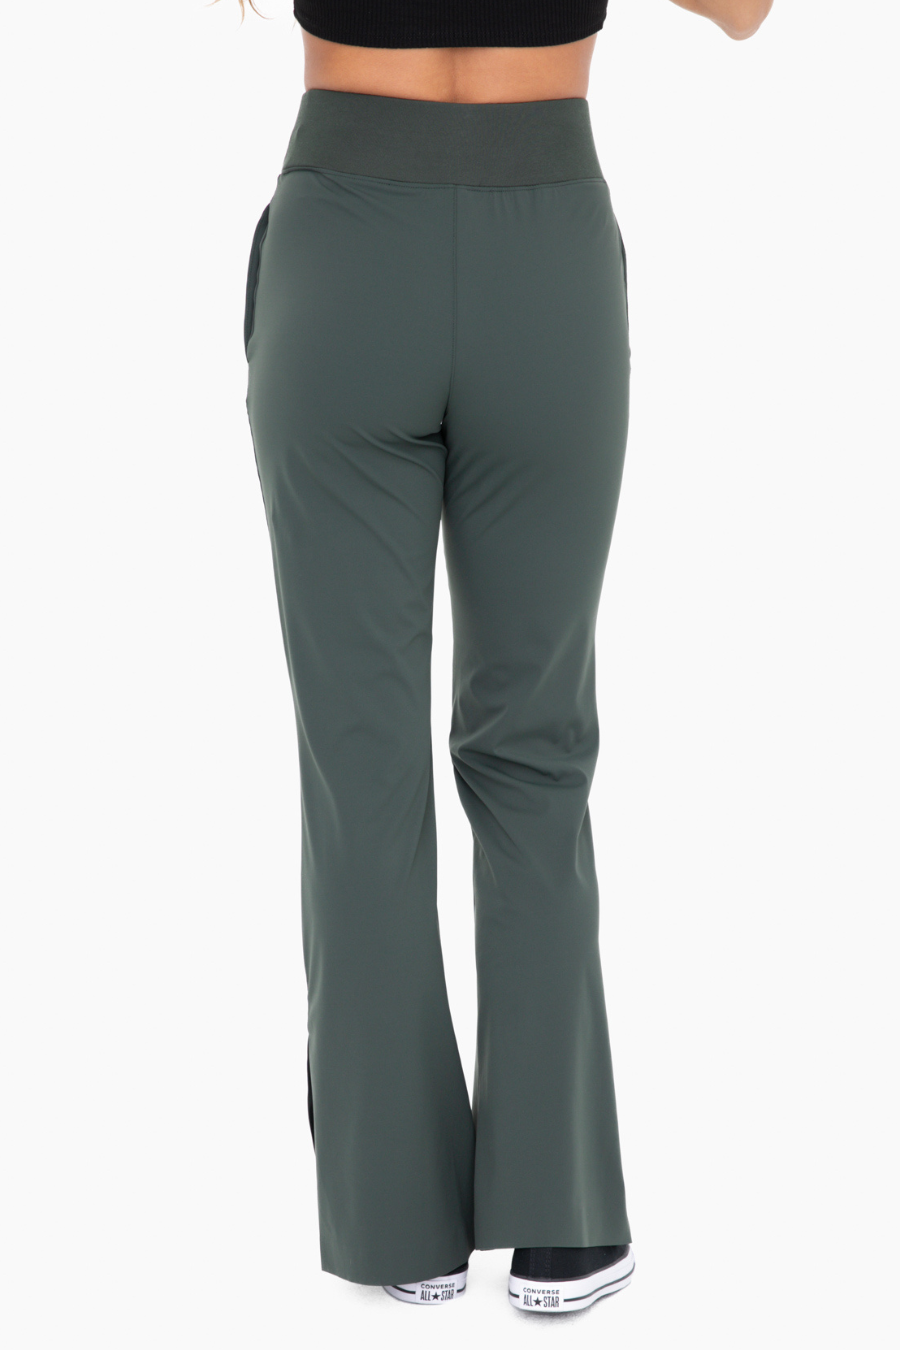 back view of the graphene wide leg active pants in the color forest 